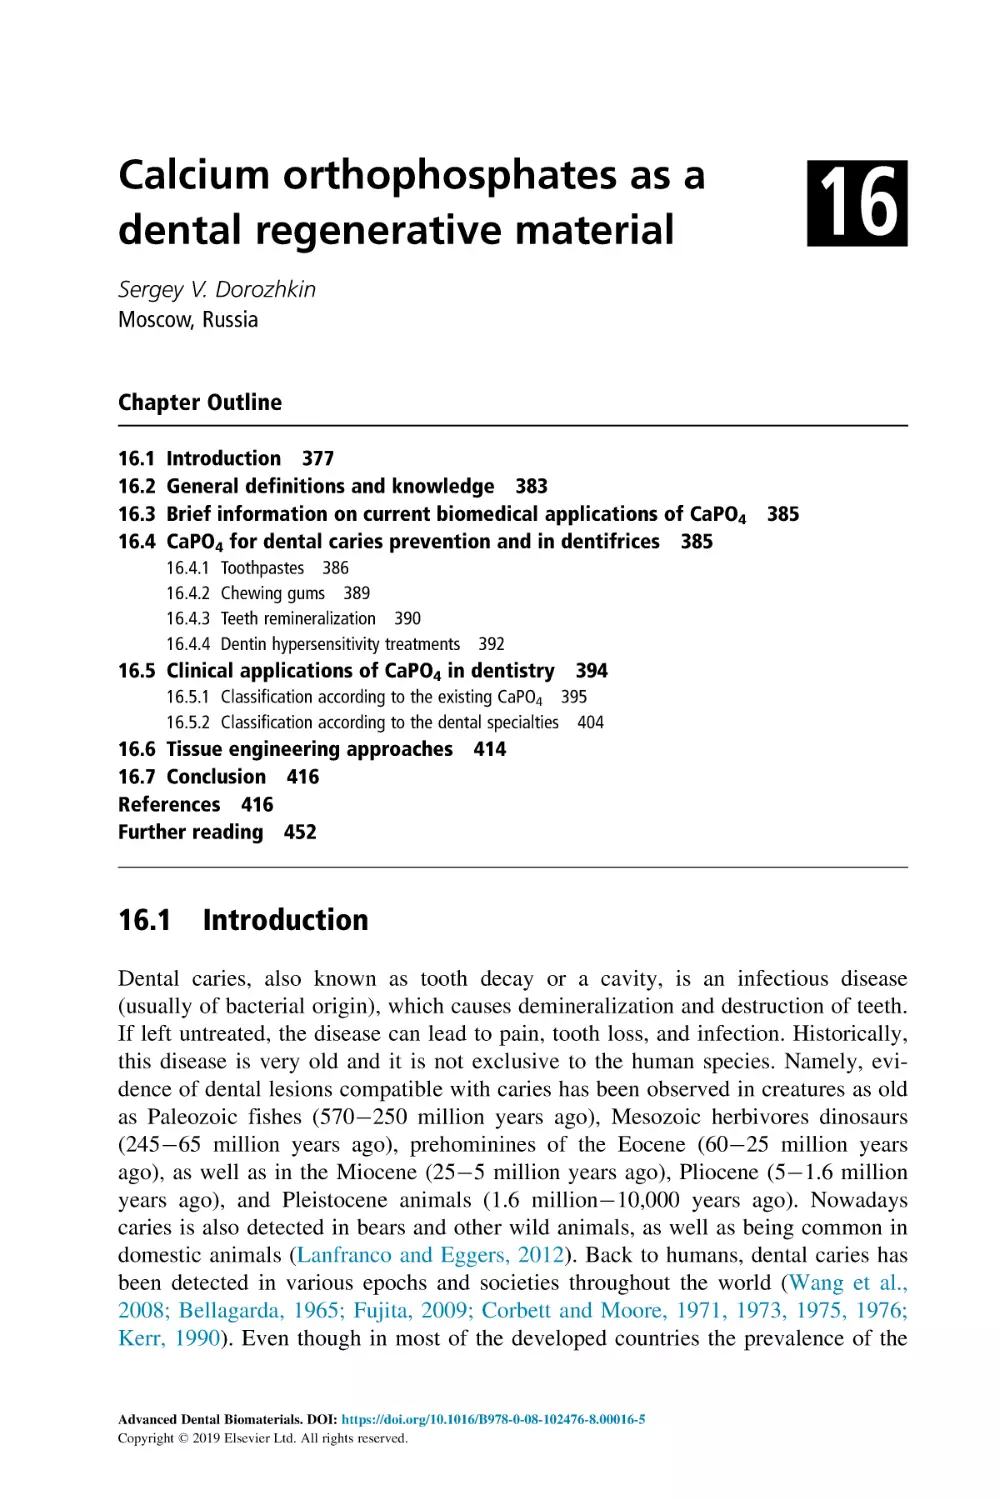 16 Calcium orthophosphates as a dental regenerative material
Chapter Outline
16.1 Introduction